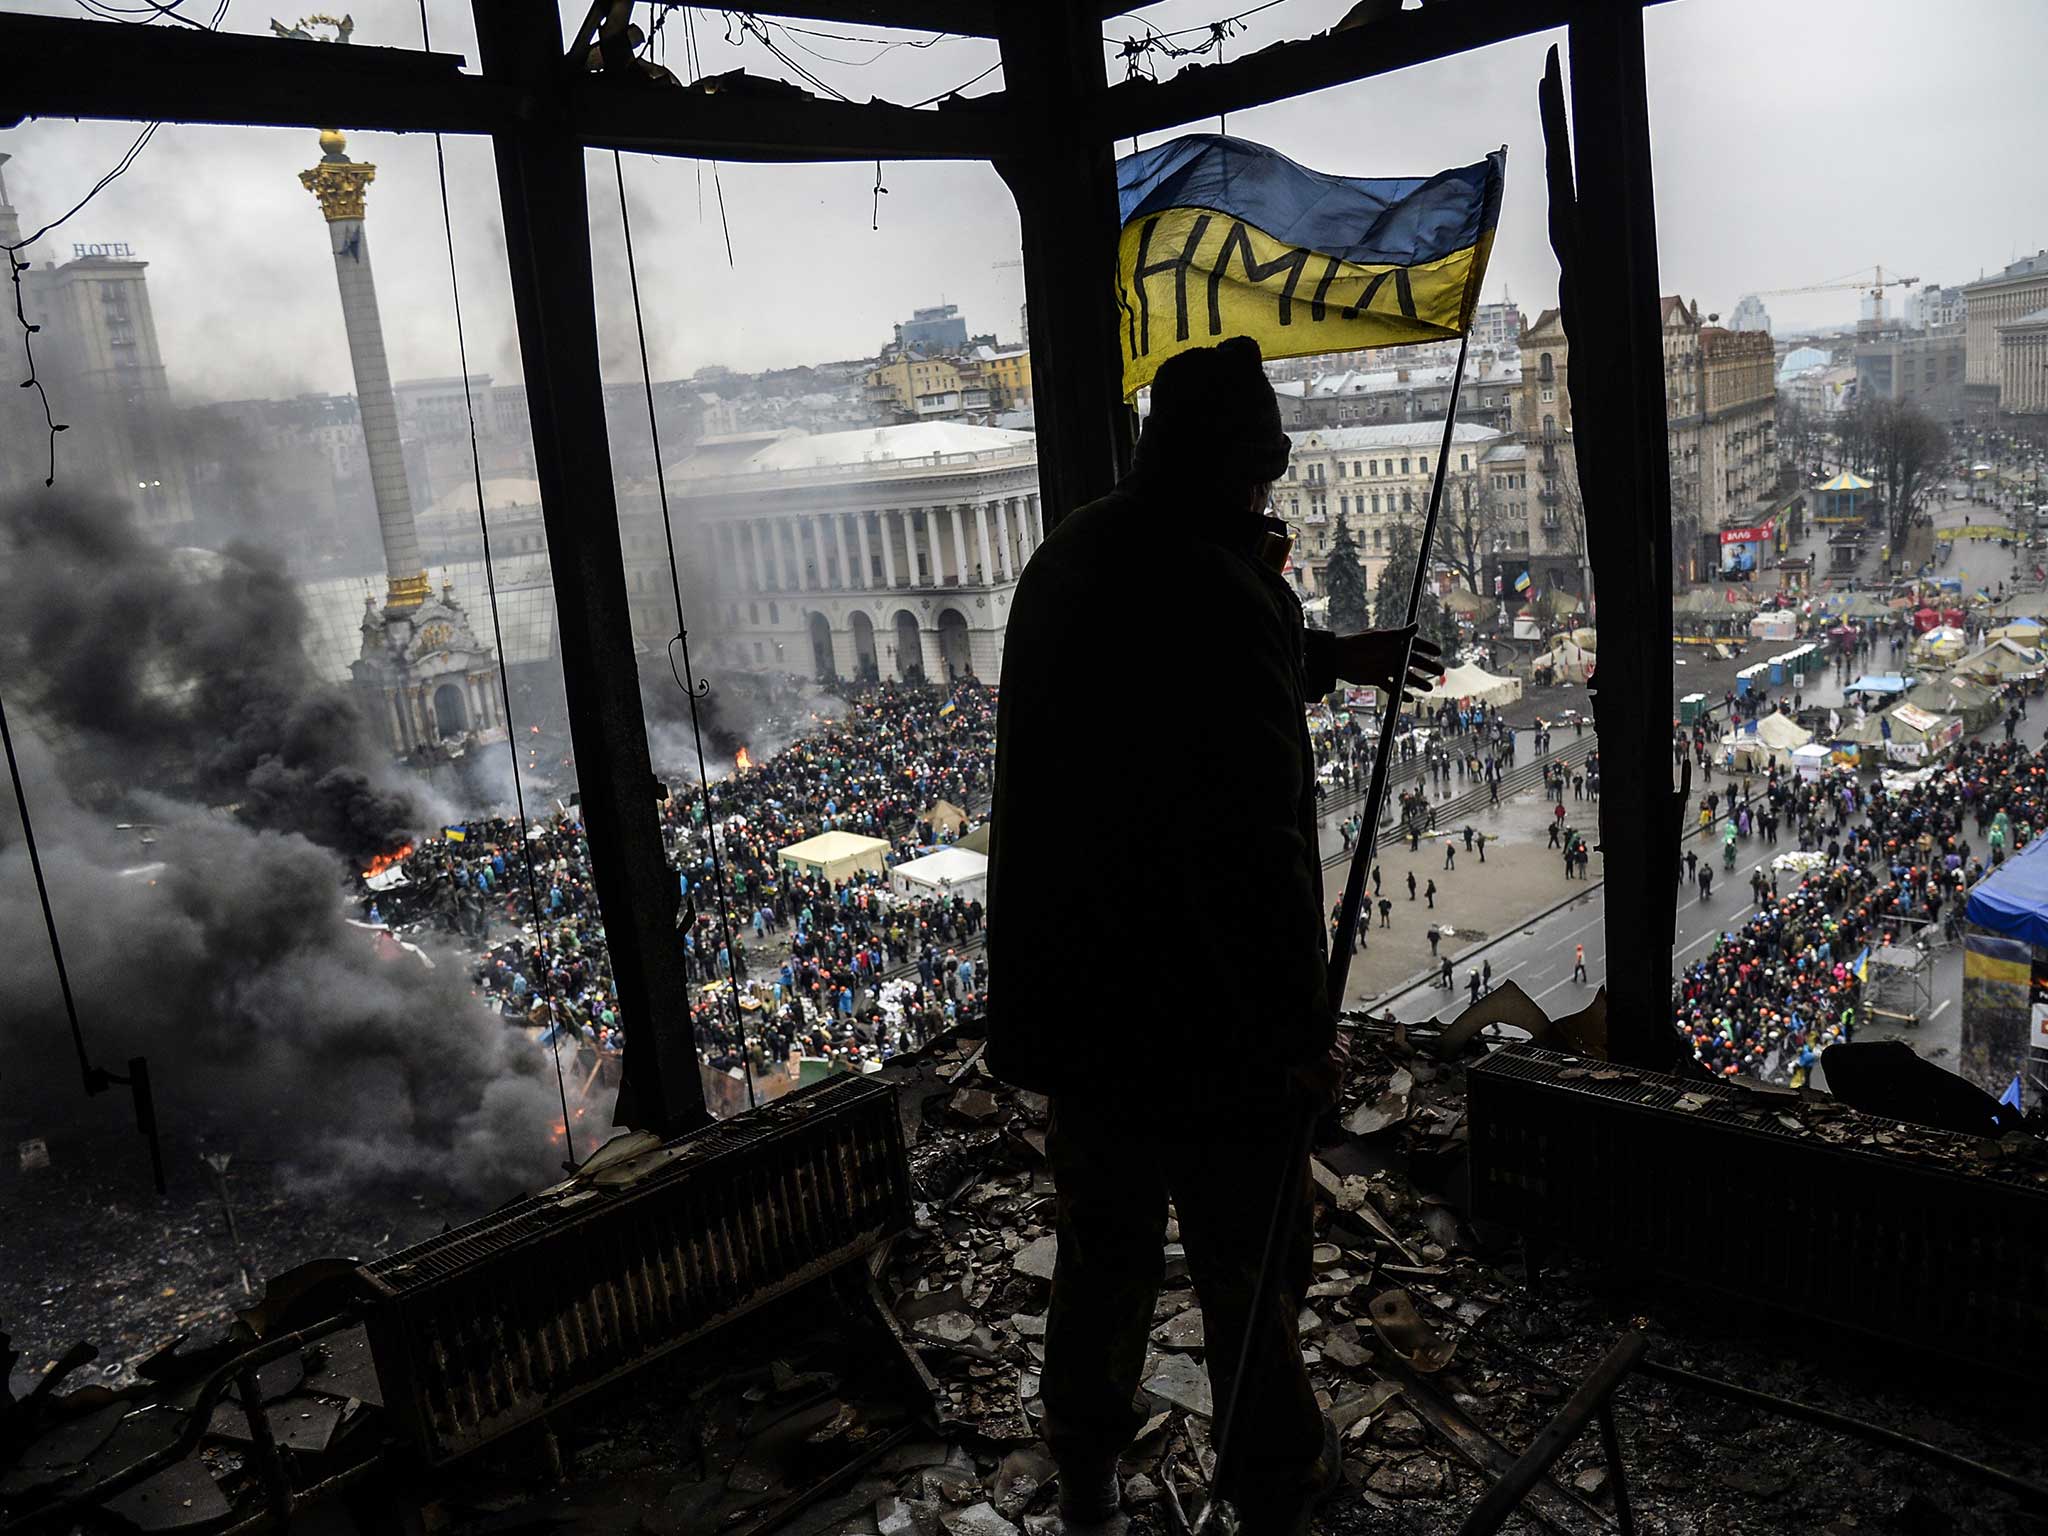 A protester holds an Ukranian national flag from a burned building during a face-off against police in Kiev in February